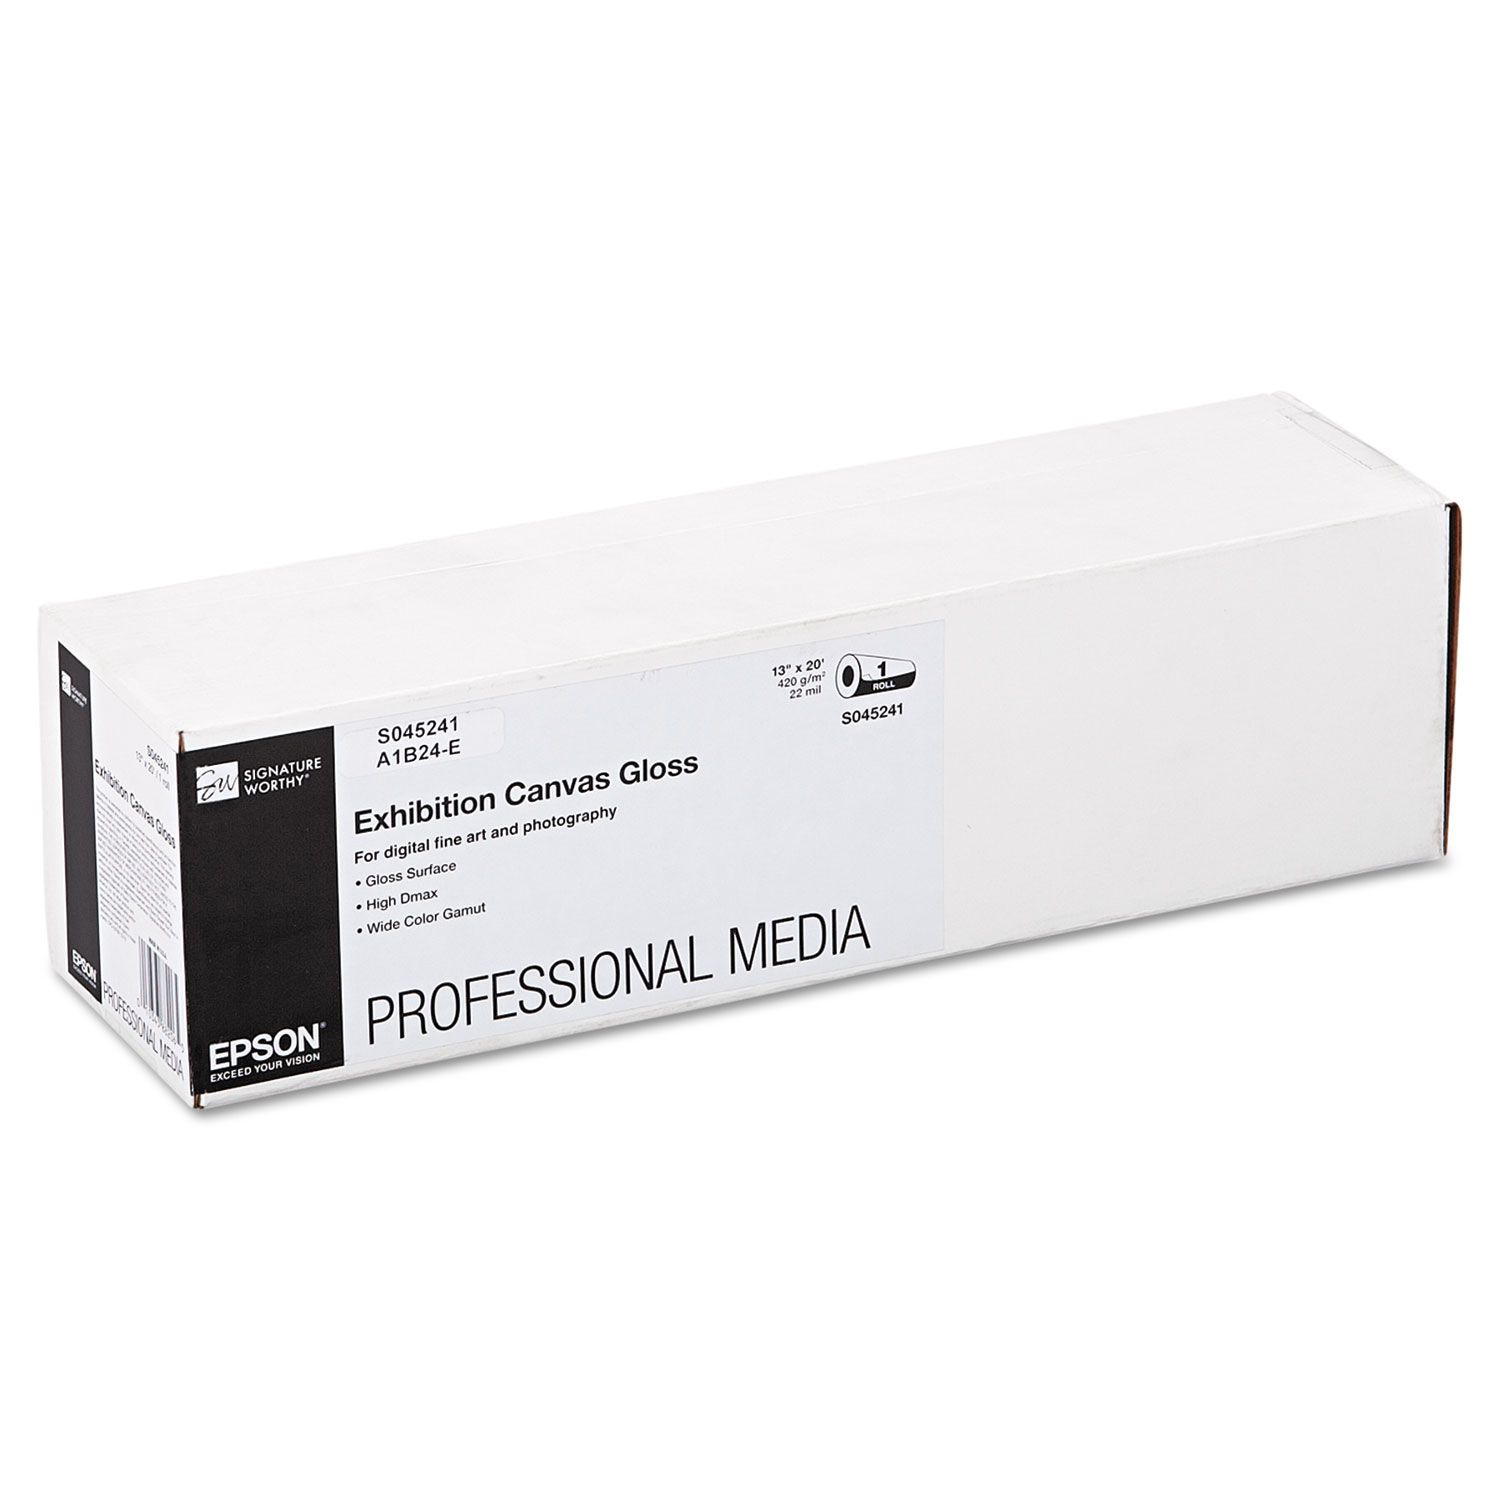  Epson S045241 Exhibition Canvas, 22 mil, 13 x 20 ft, Glossy White (EPSS045241) 